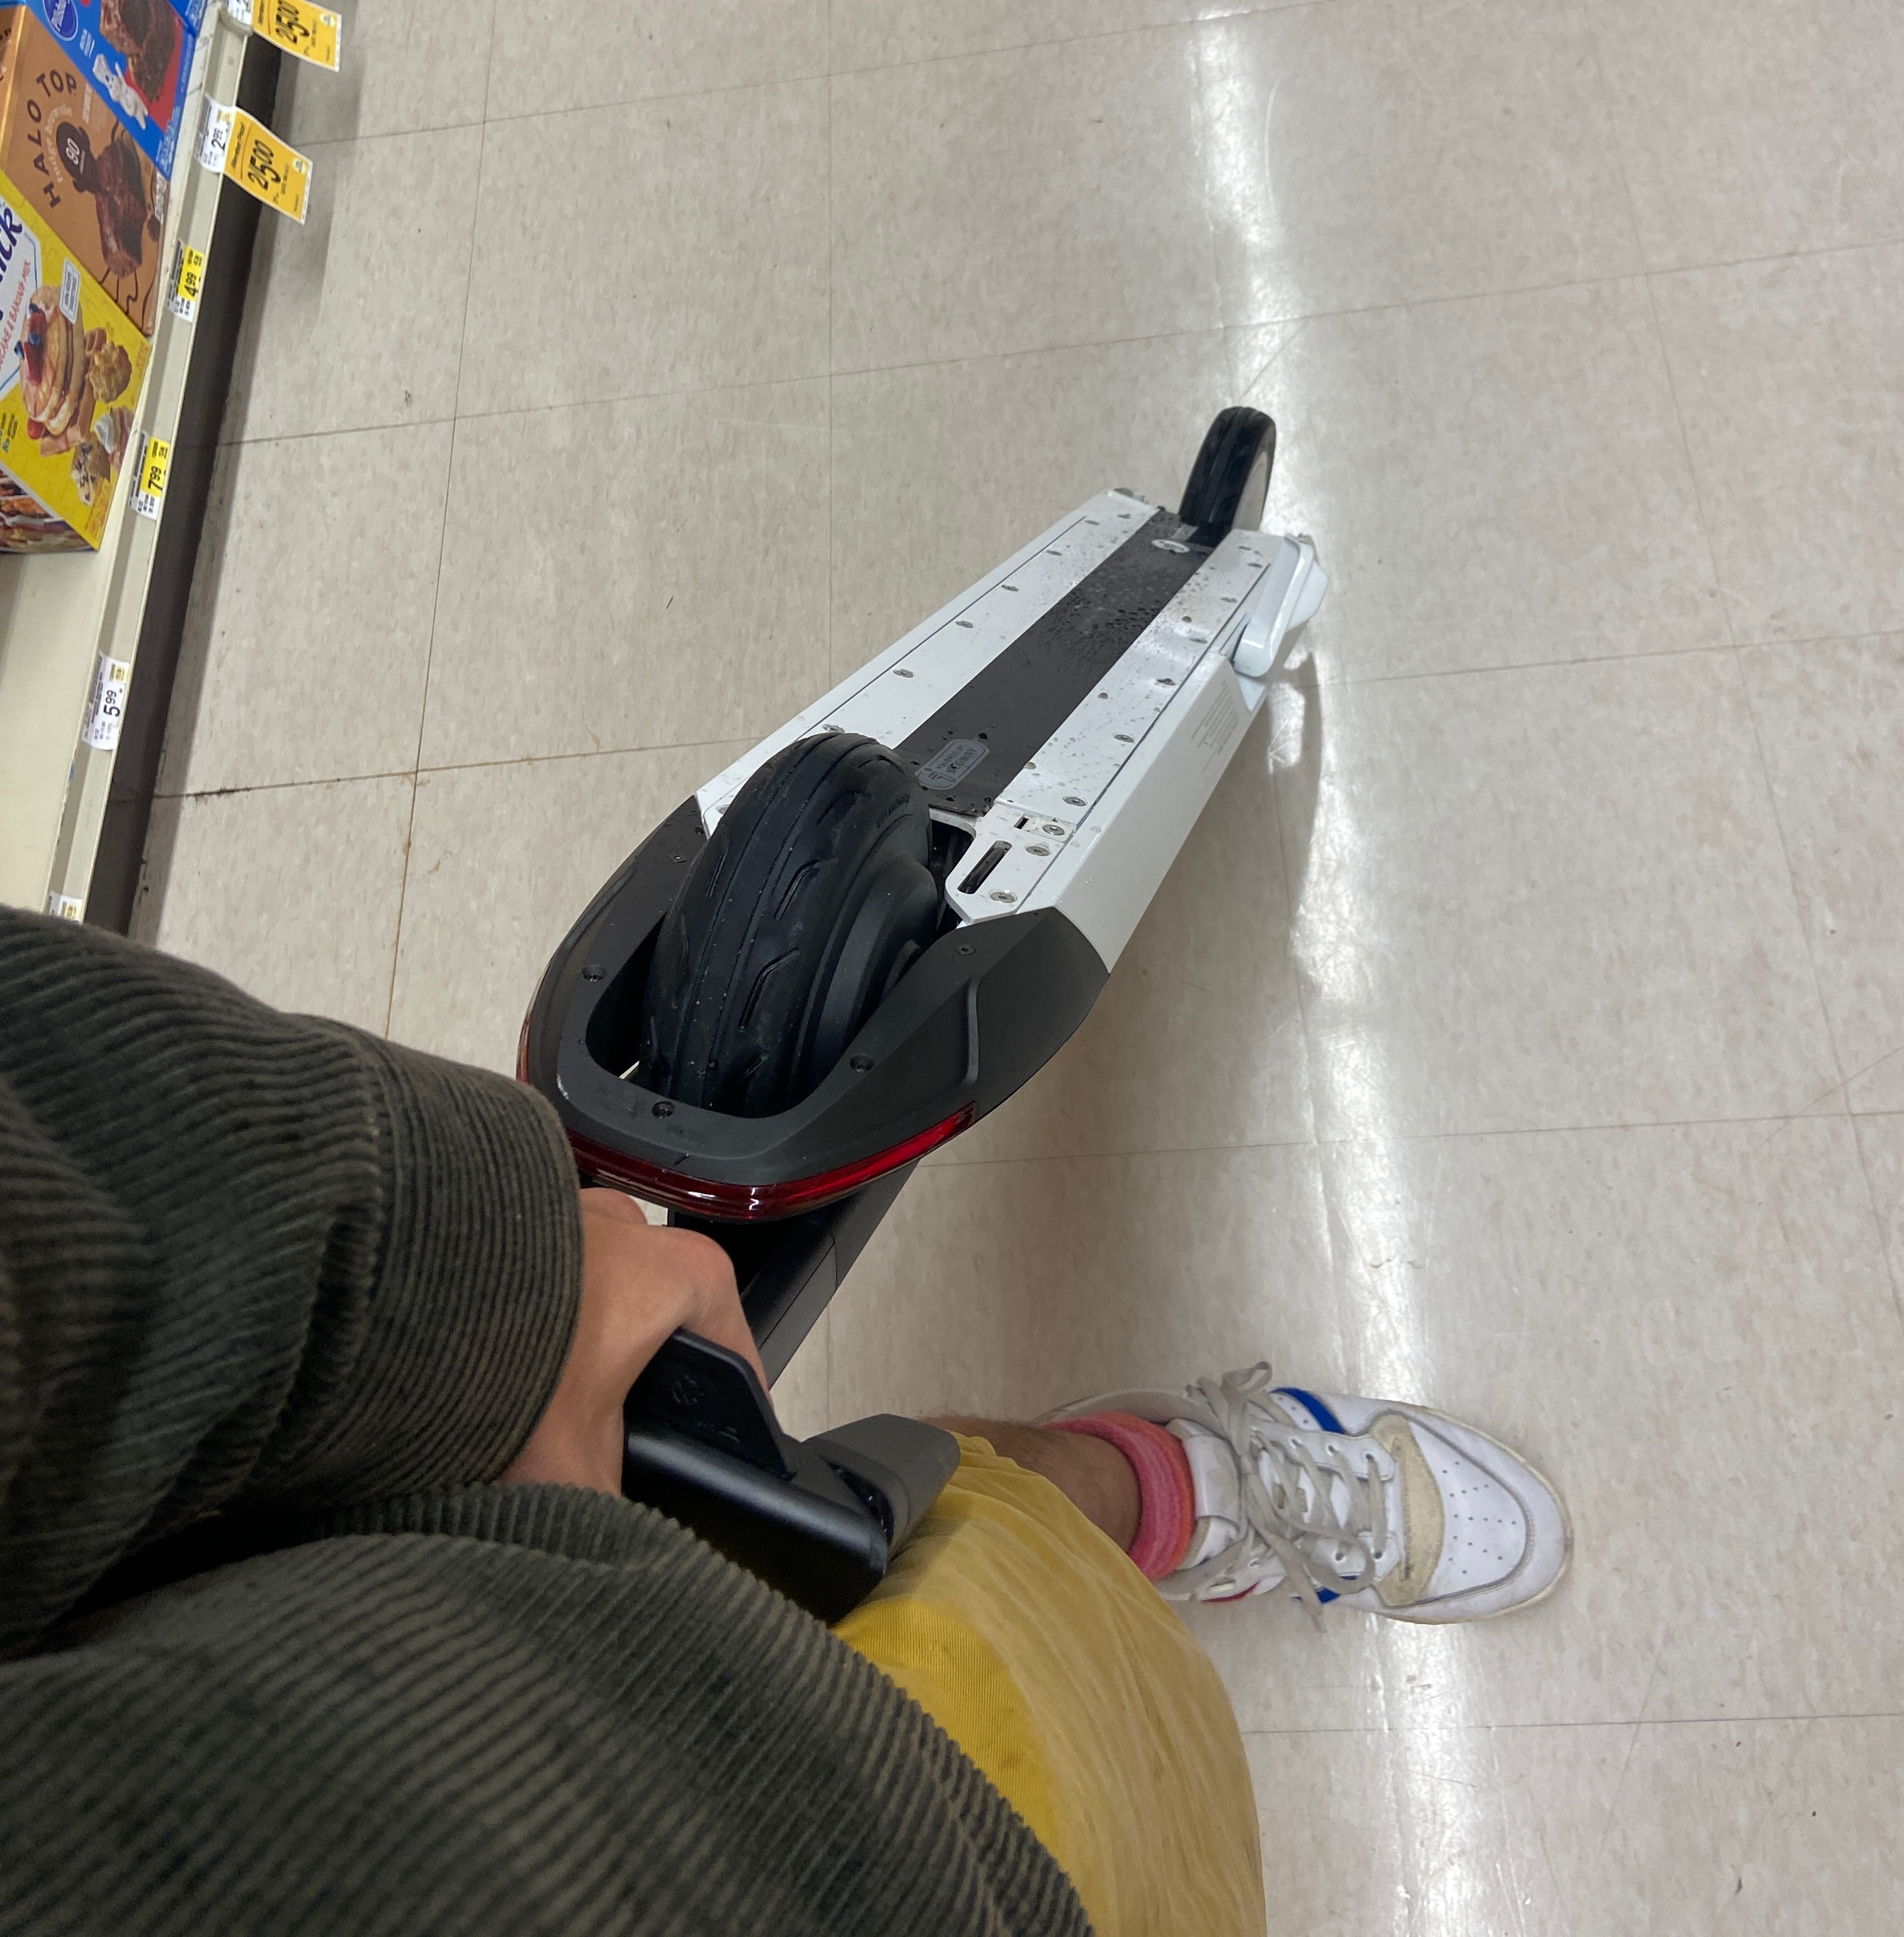 Folded electric scooter in grocery store